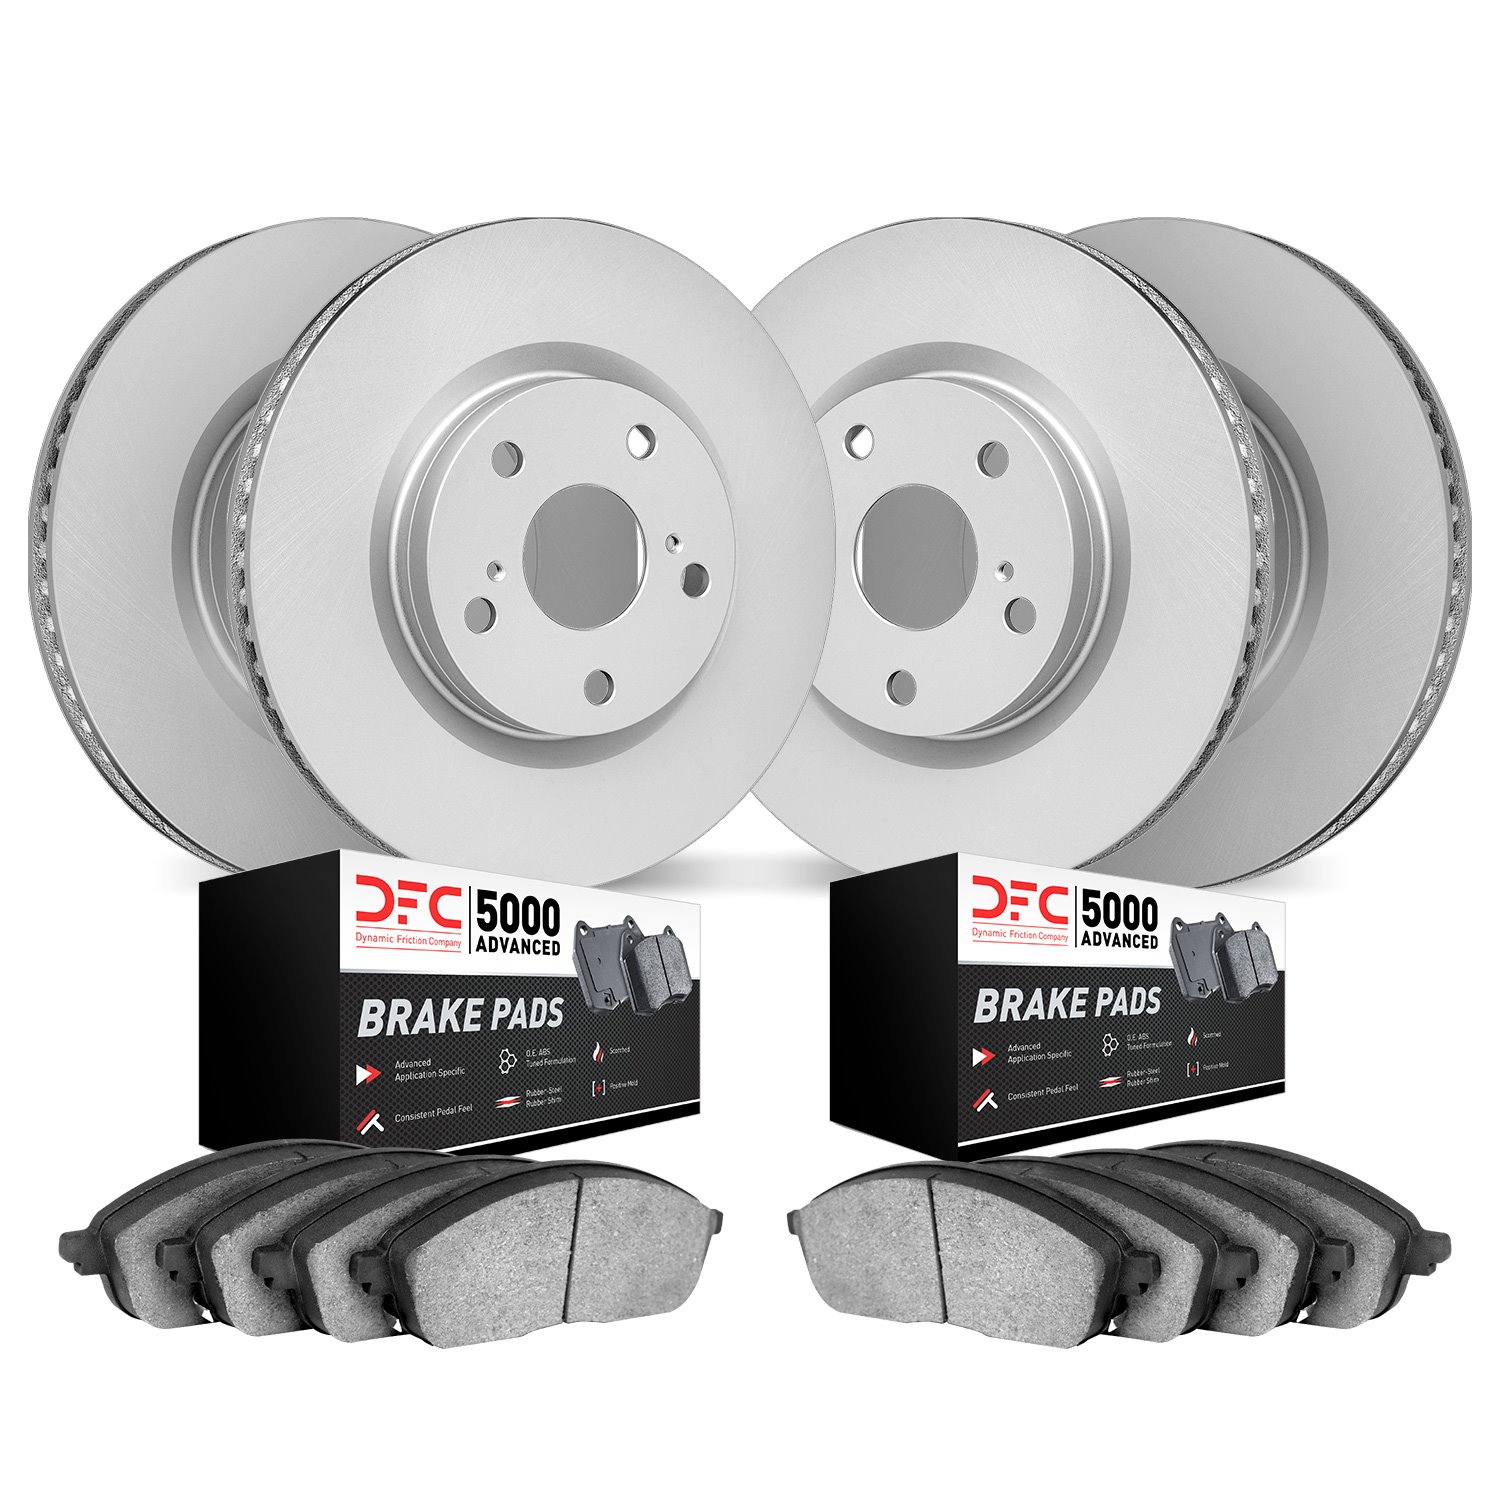 4504-73068 Geospec Brake Rotors w/5000 Advanced Brake Pads Kit, Fits Select Audi/Volkswagen, Position: Front and Rear